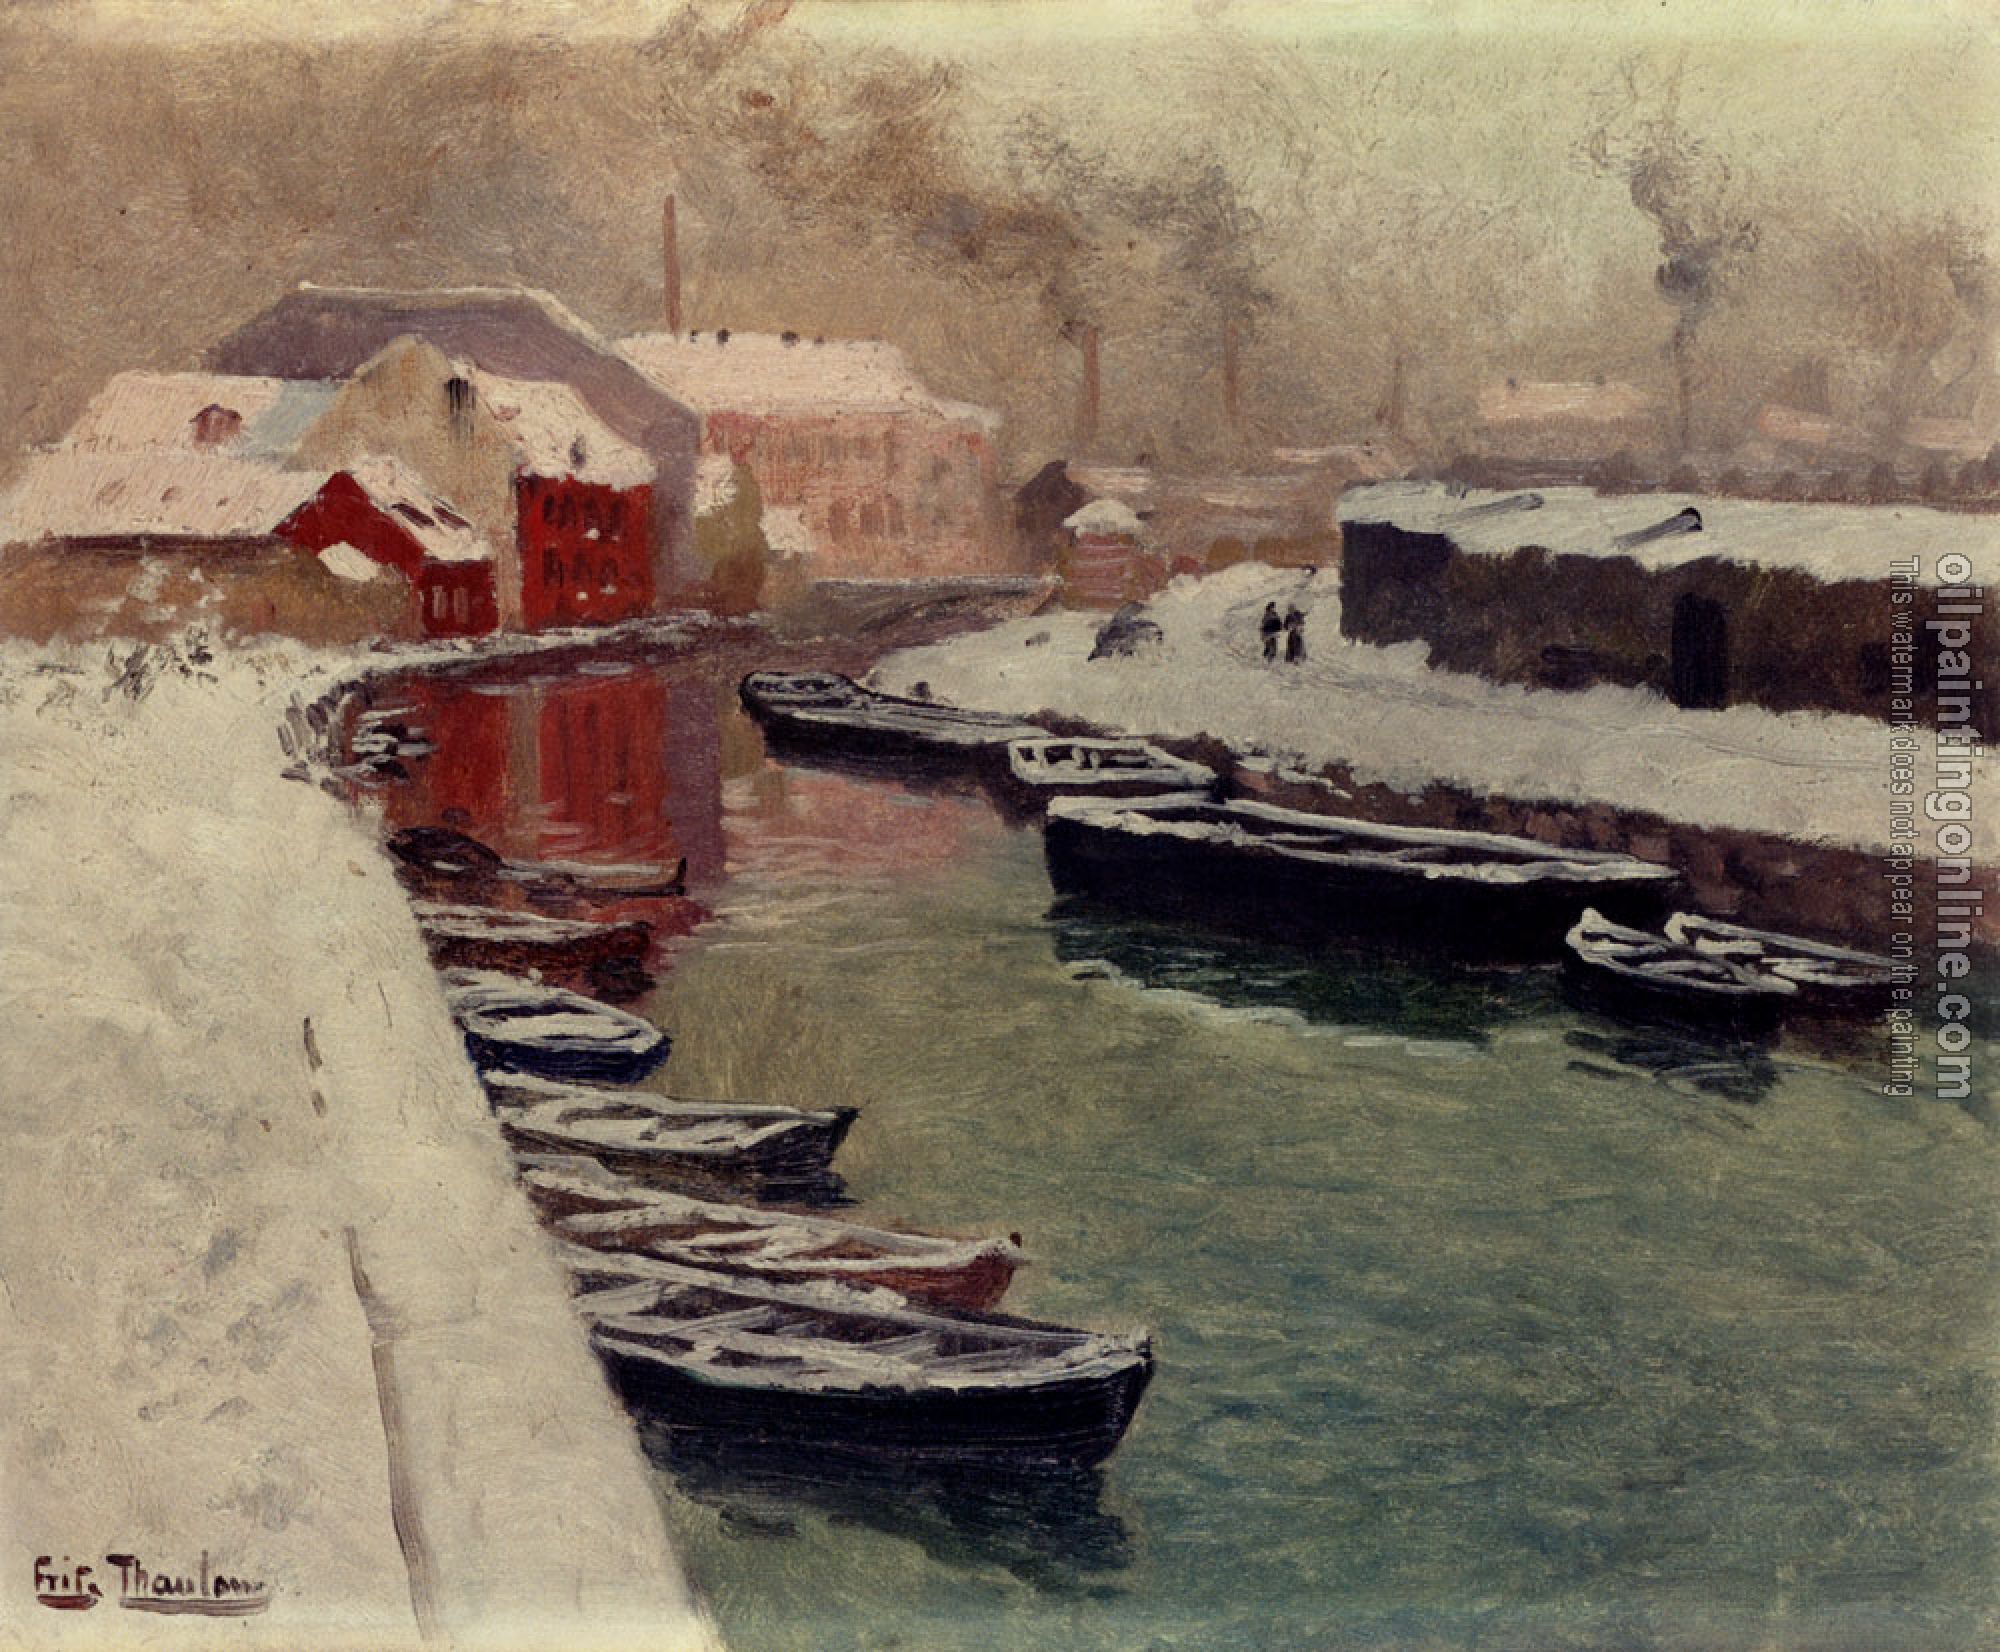 Thaulow, Frits - A Snowy Harbo